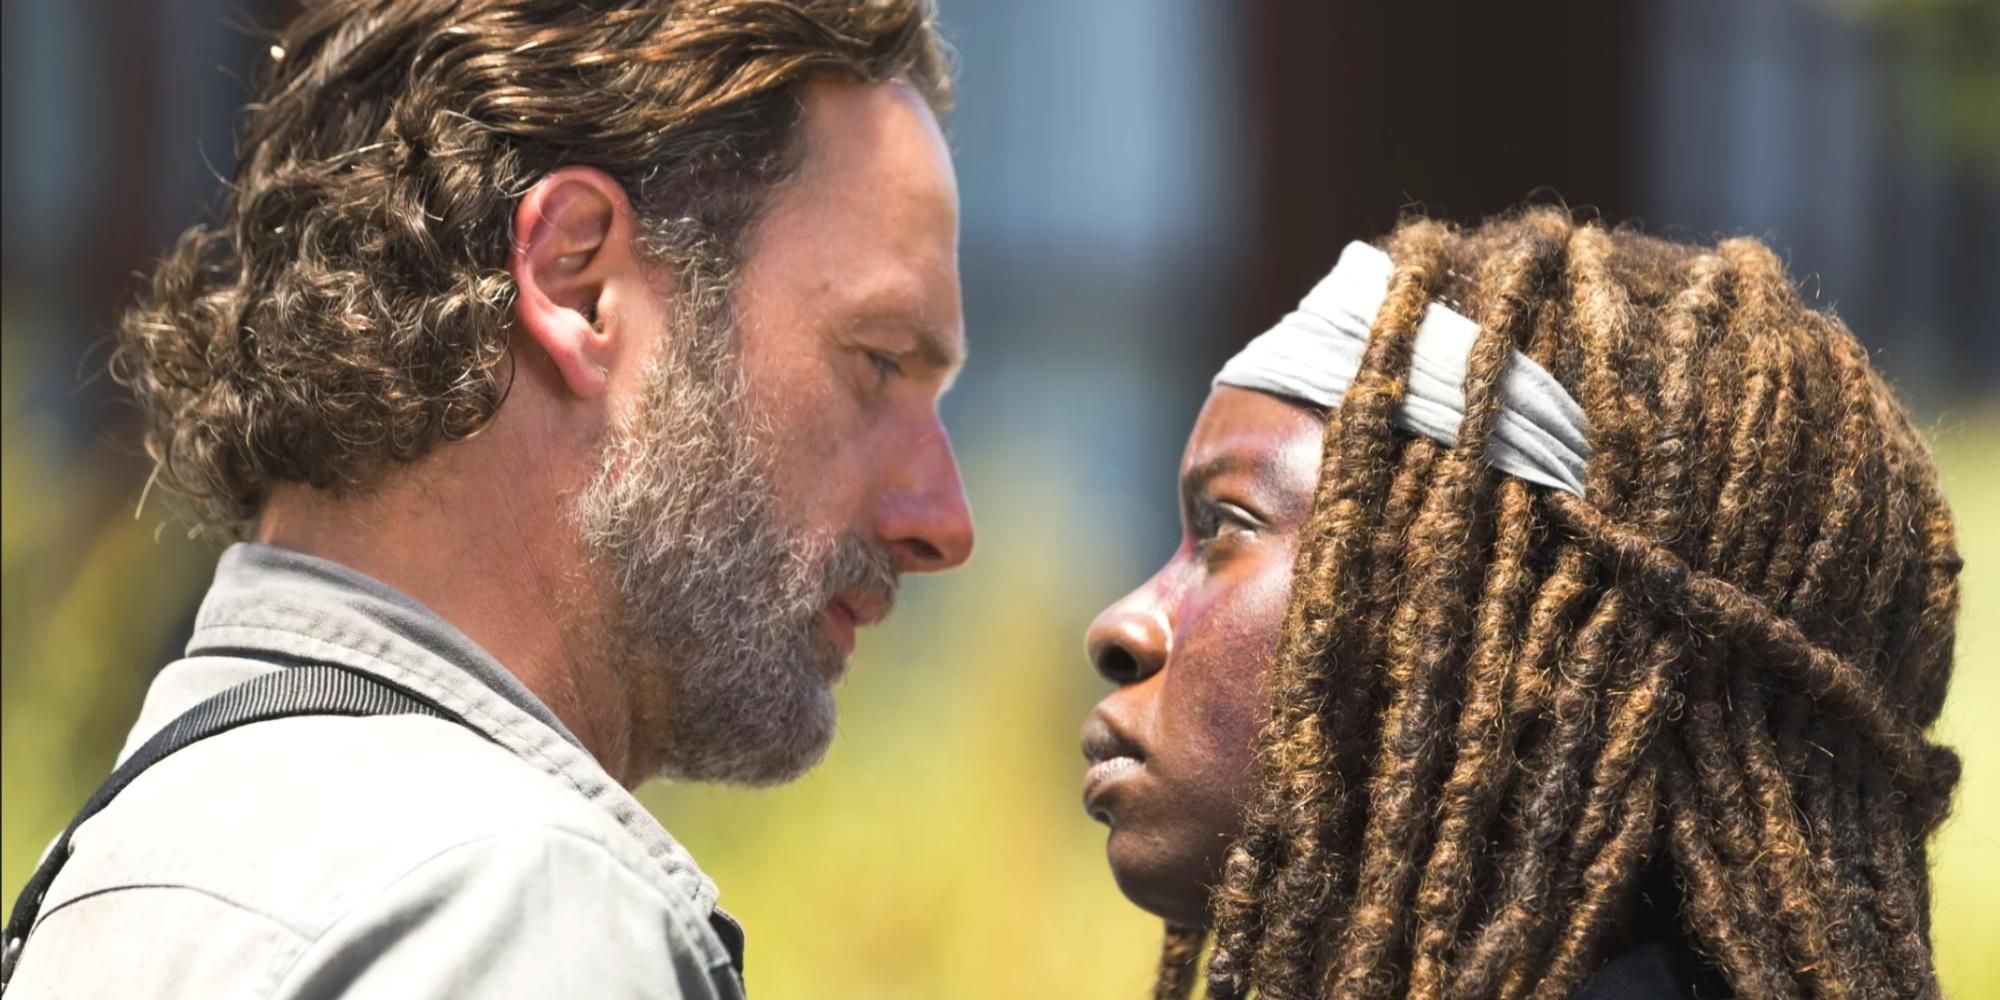 Danai Gurira as Michonne and Andrew Lincoln as Rick Grimes in The Walking Dead